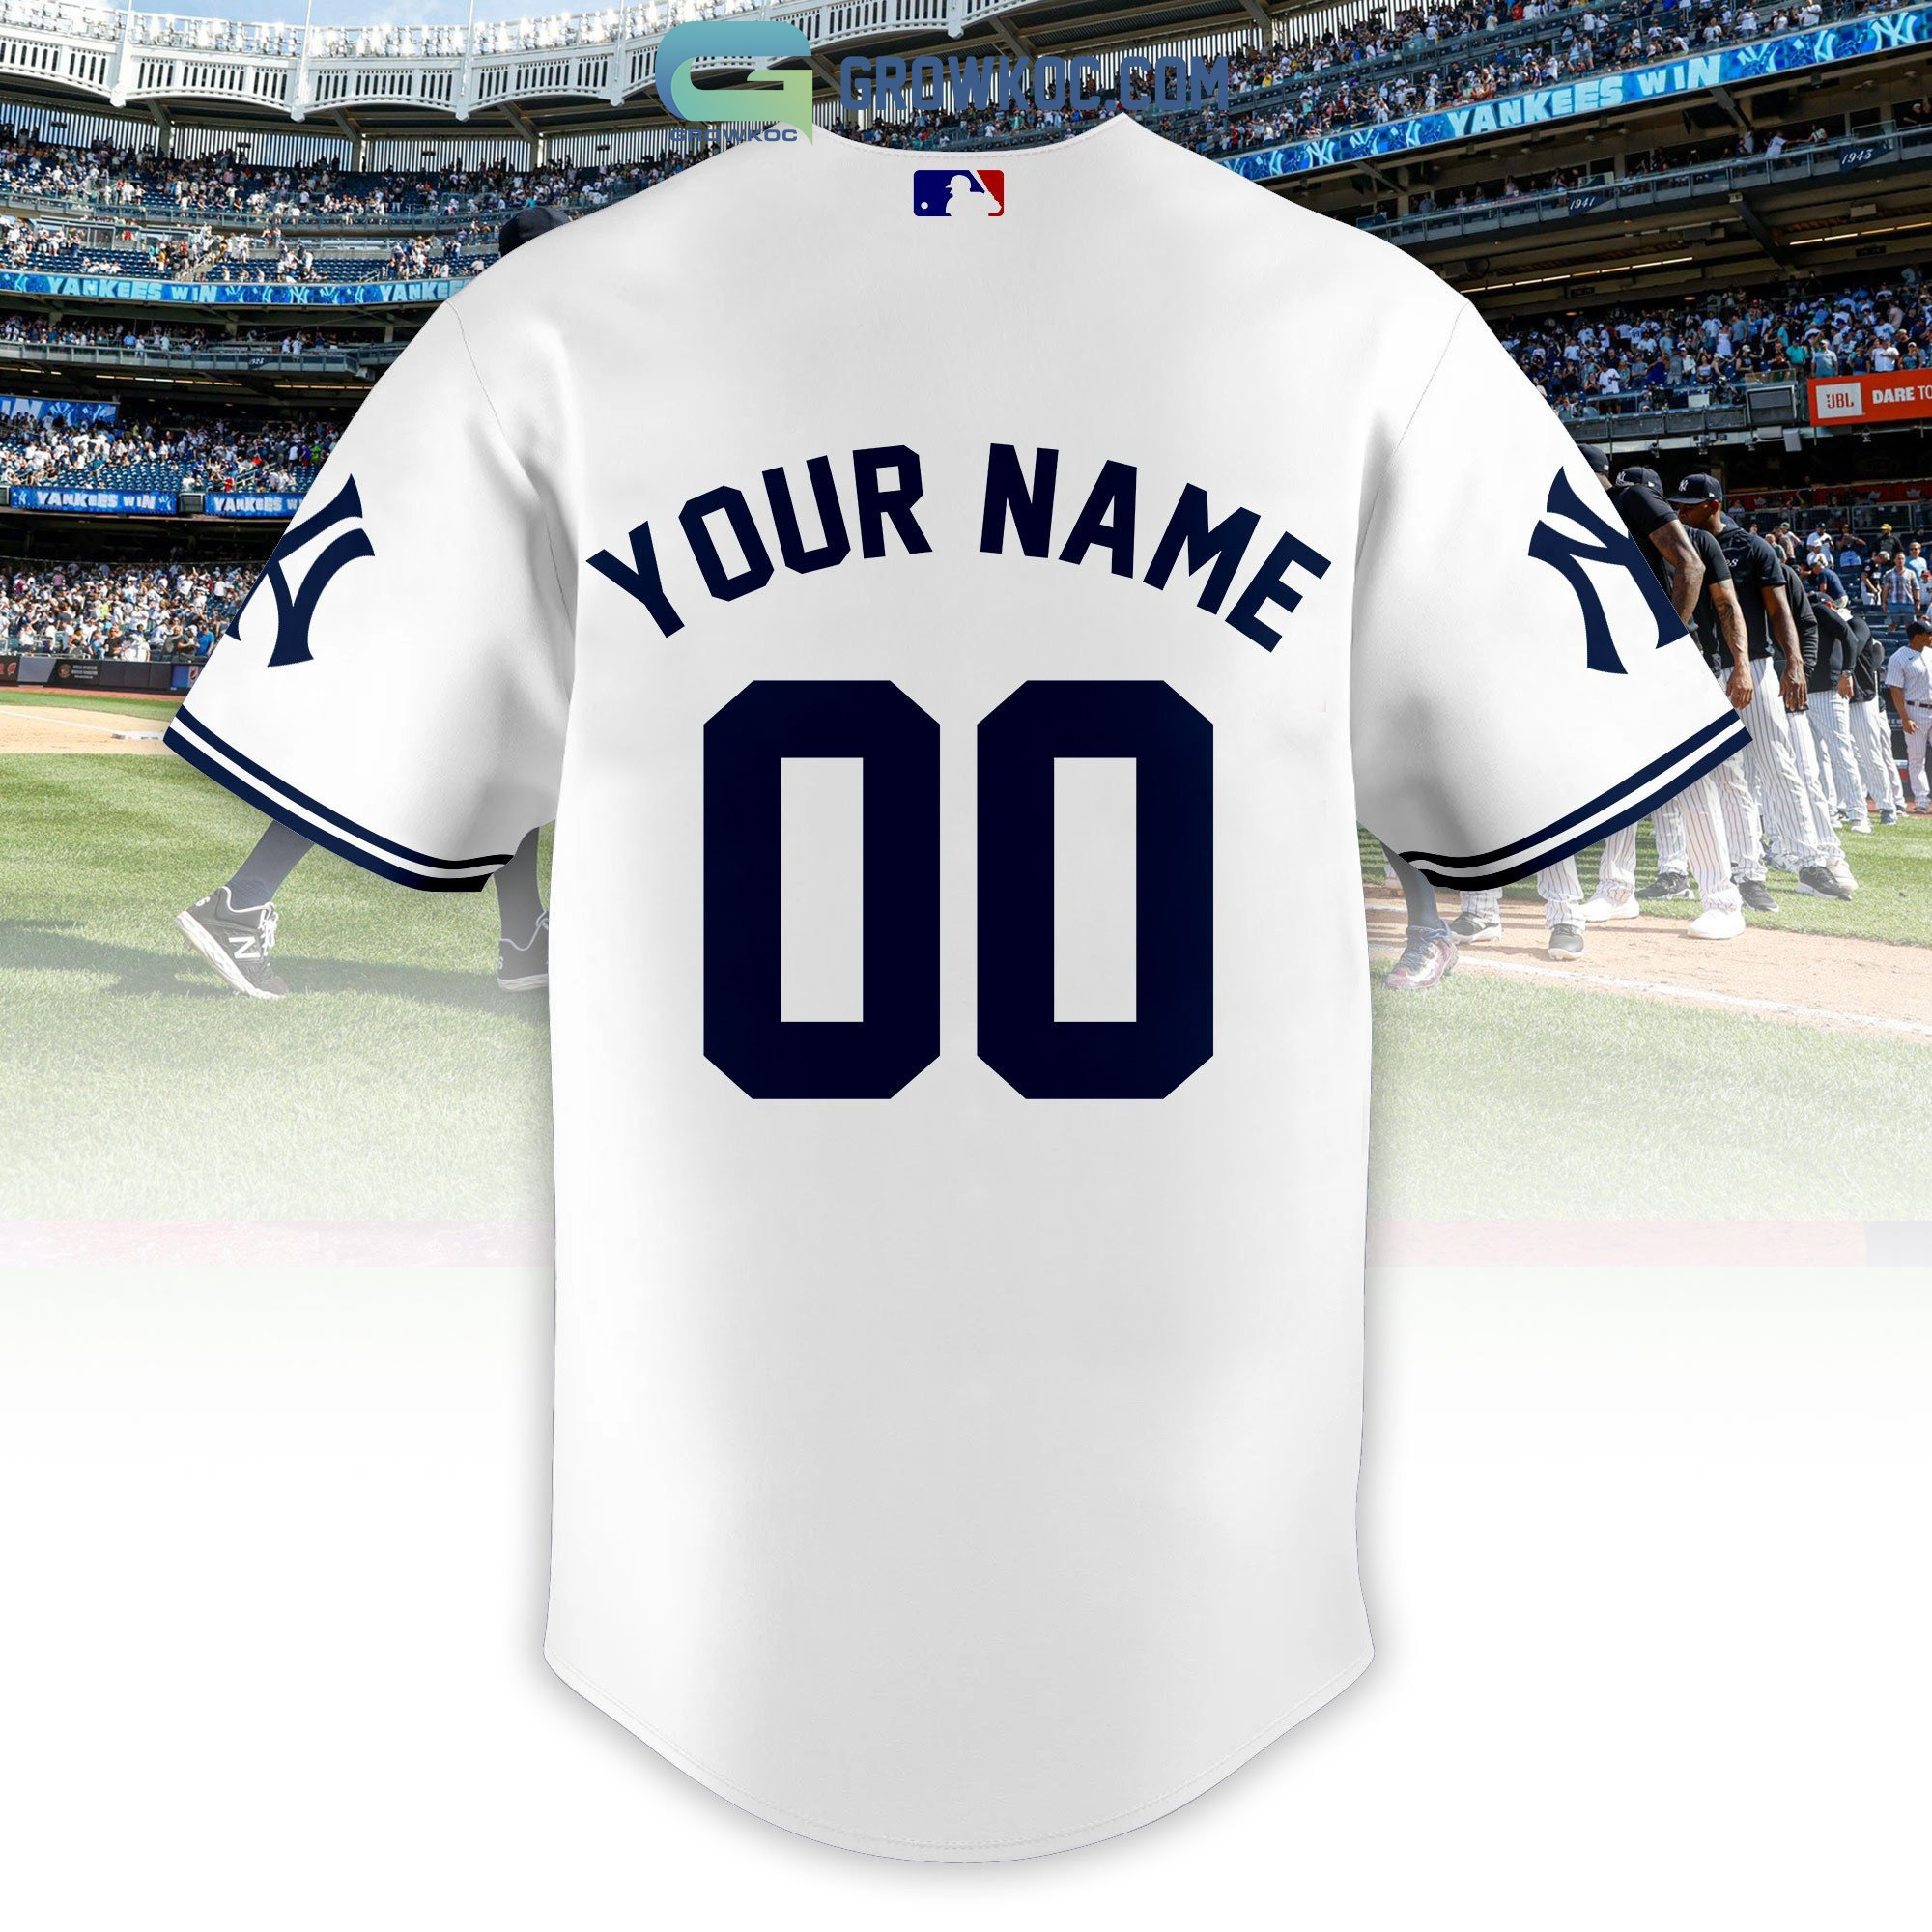 Personalized Name New York Yankees City View 3D Baseball Jersey Shirt -  Bring Your Ideas, Thoughts And Imaginations Into Reality Today